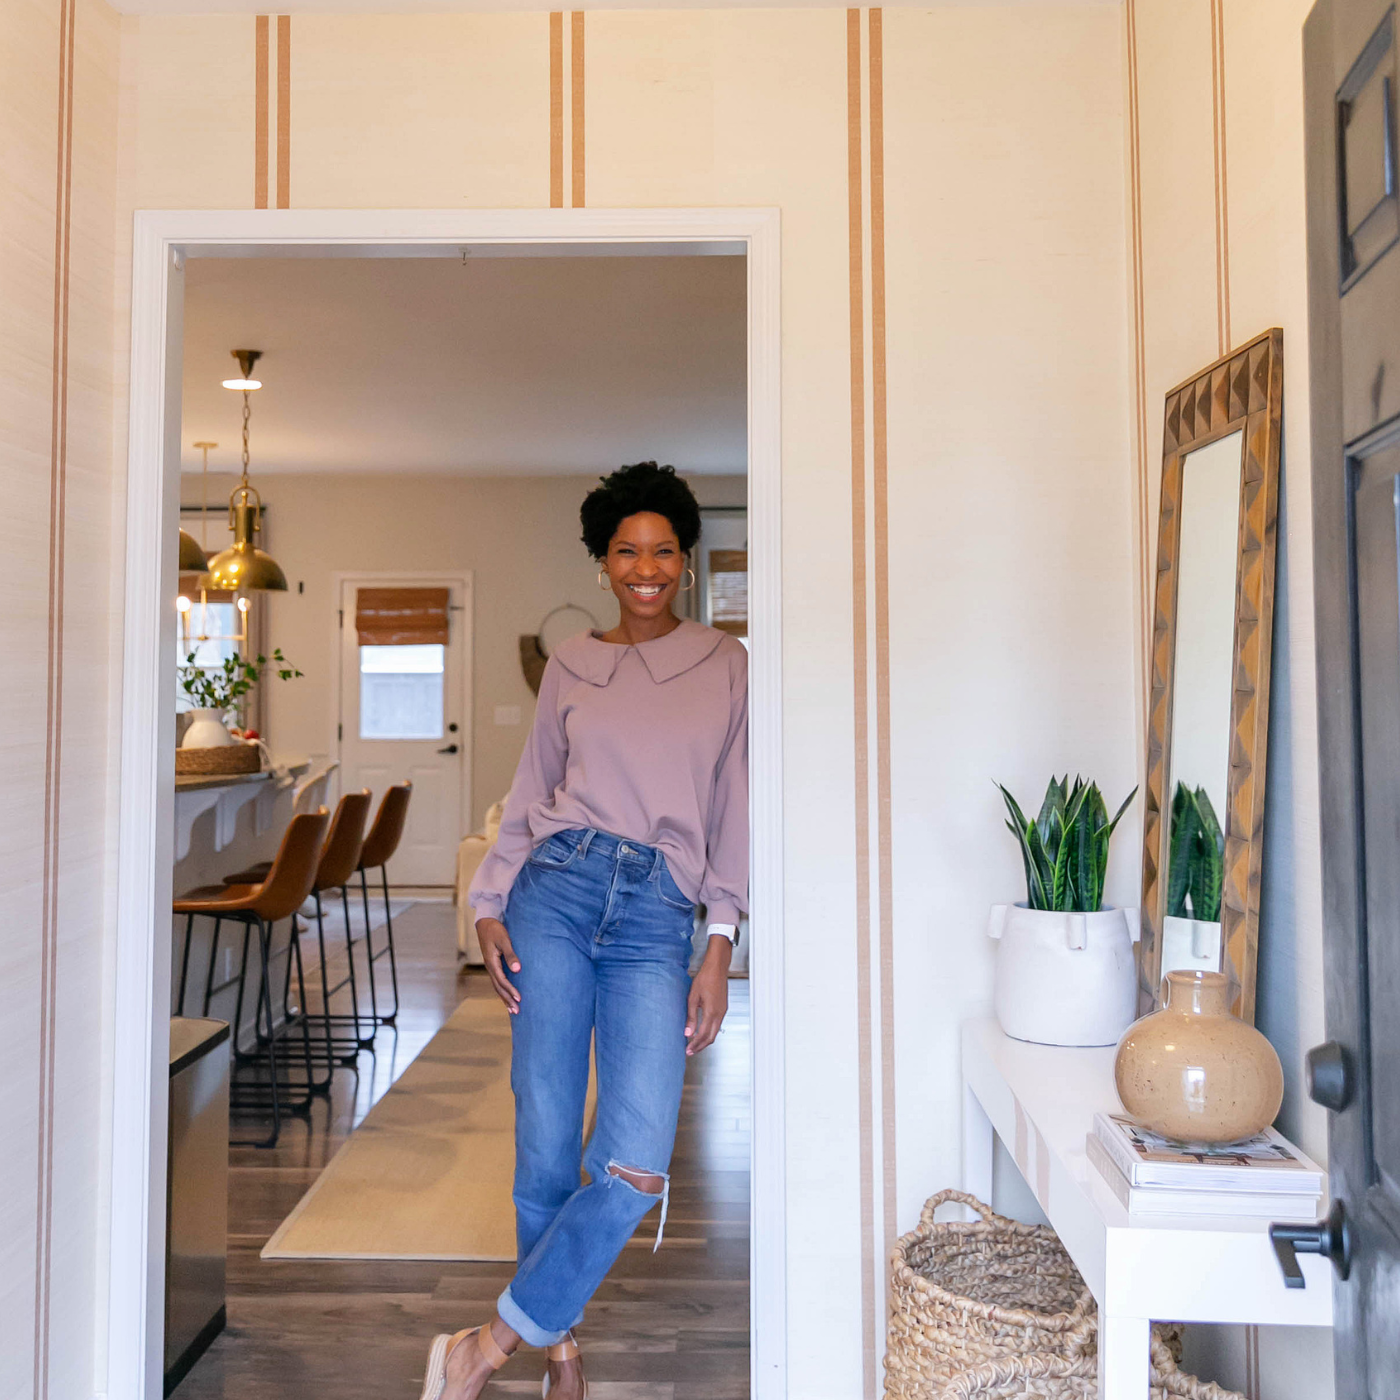 Tiffany stands in the new entryway in her home and looks at the camera smiling. She is wearing a mauve blouse tucked into blue jeans and tan sandles. The design on the wallpaper has a cream background and two small dark tan repeating stripes. To the front left is a small white table with a tall green plant in a white vase, a tan vase and a large rectangular mirror balanced against the wall and two large grass baskets underneath the table. Behind Tiffanie is a banquette with three tall brown chairs with black wire bottoms, a cream carpet over dark brown wooden floors and a white door leading outside.